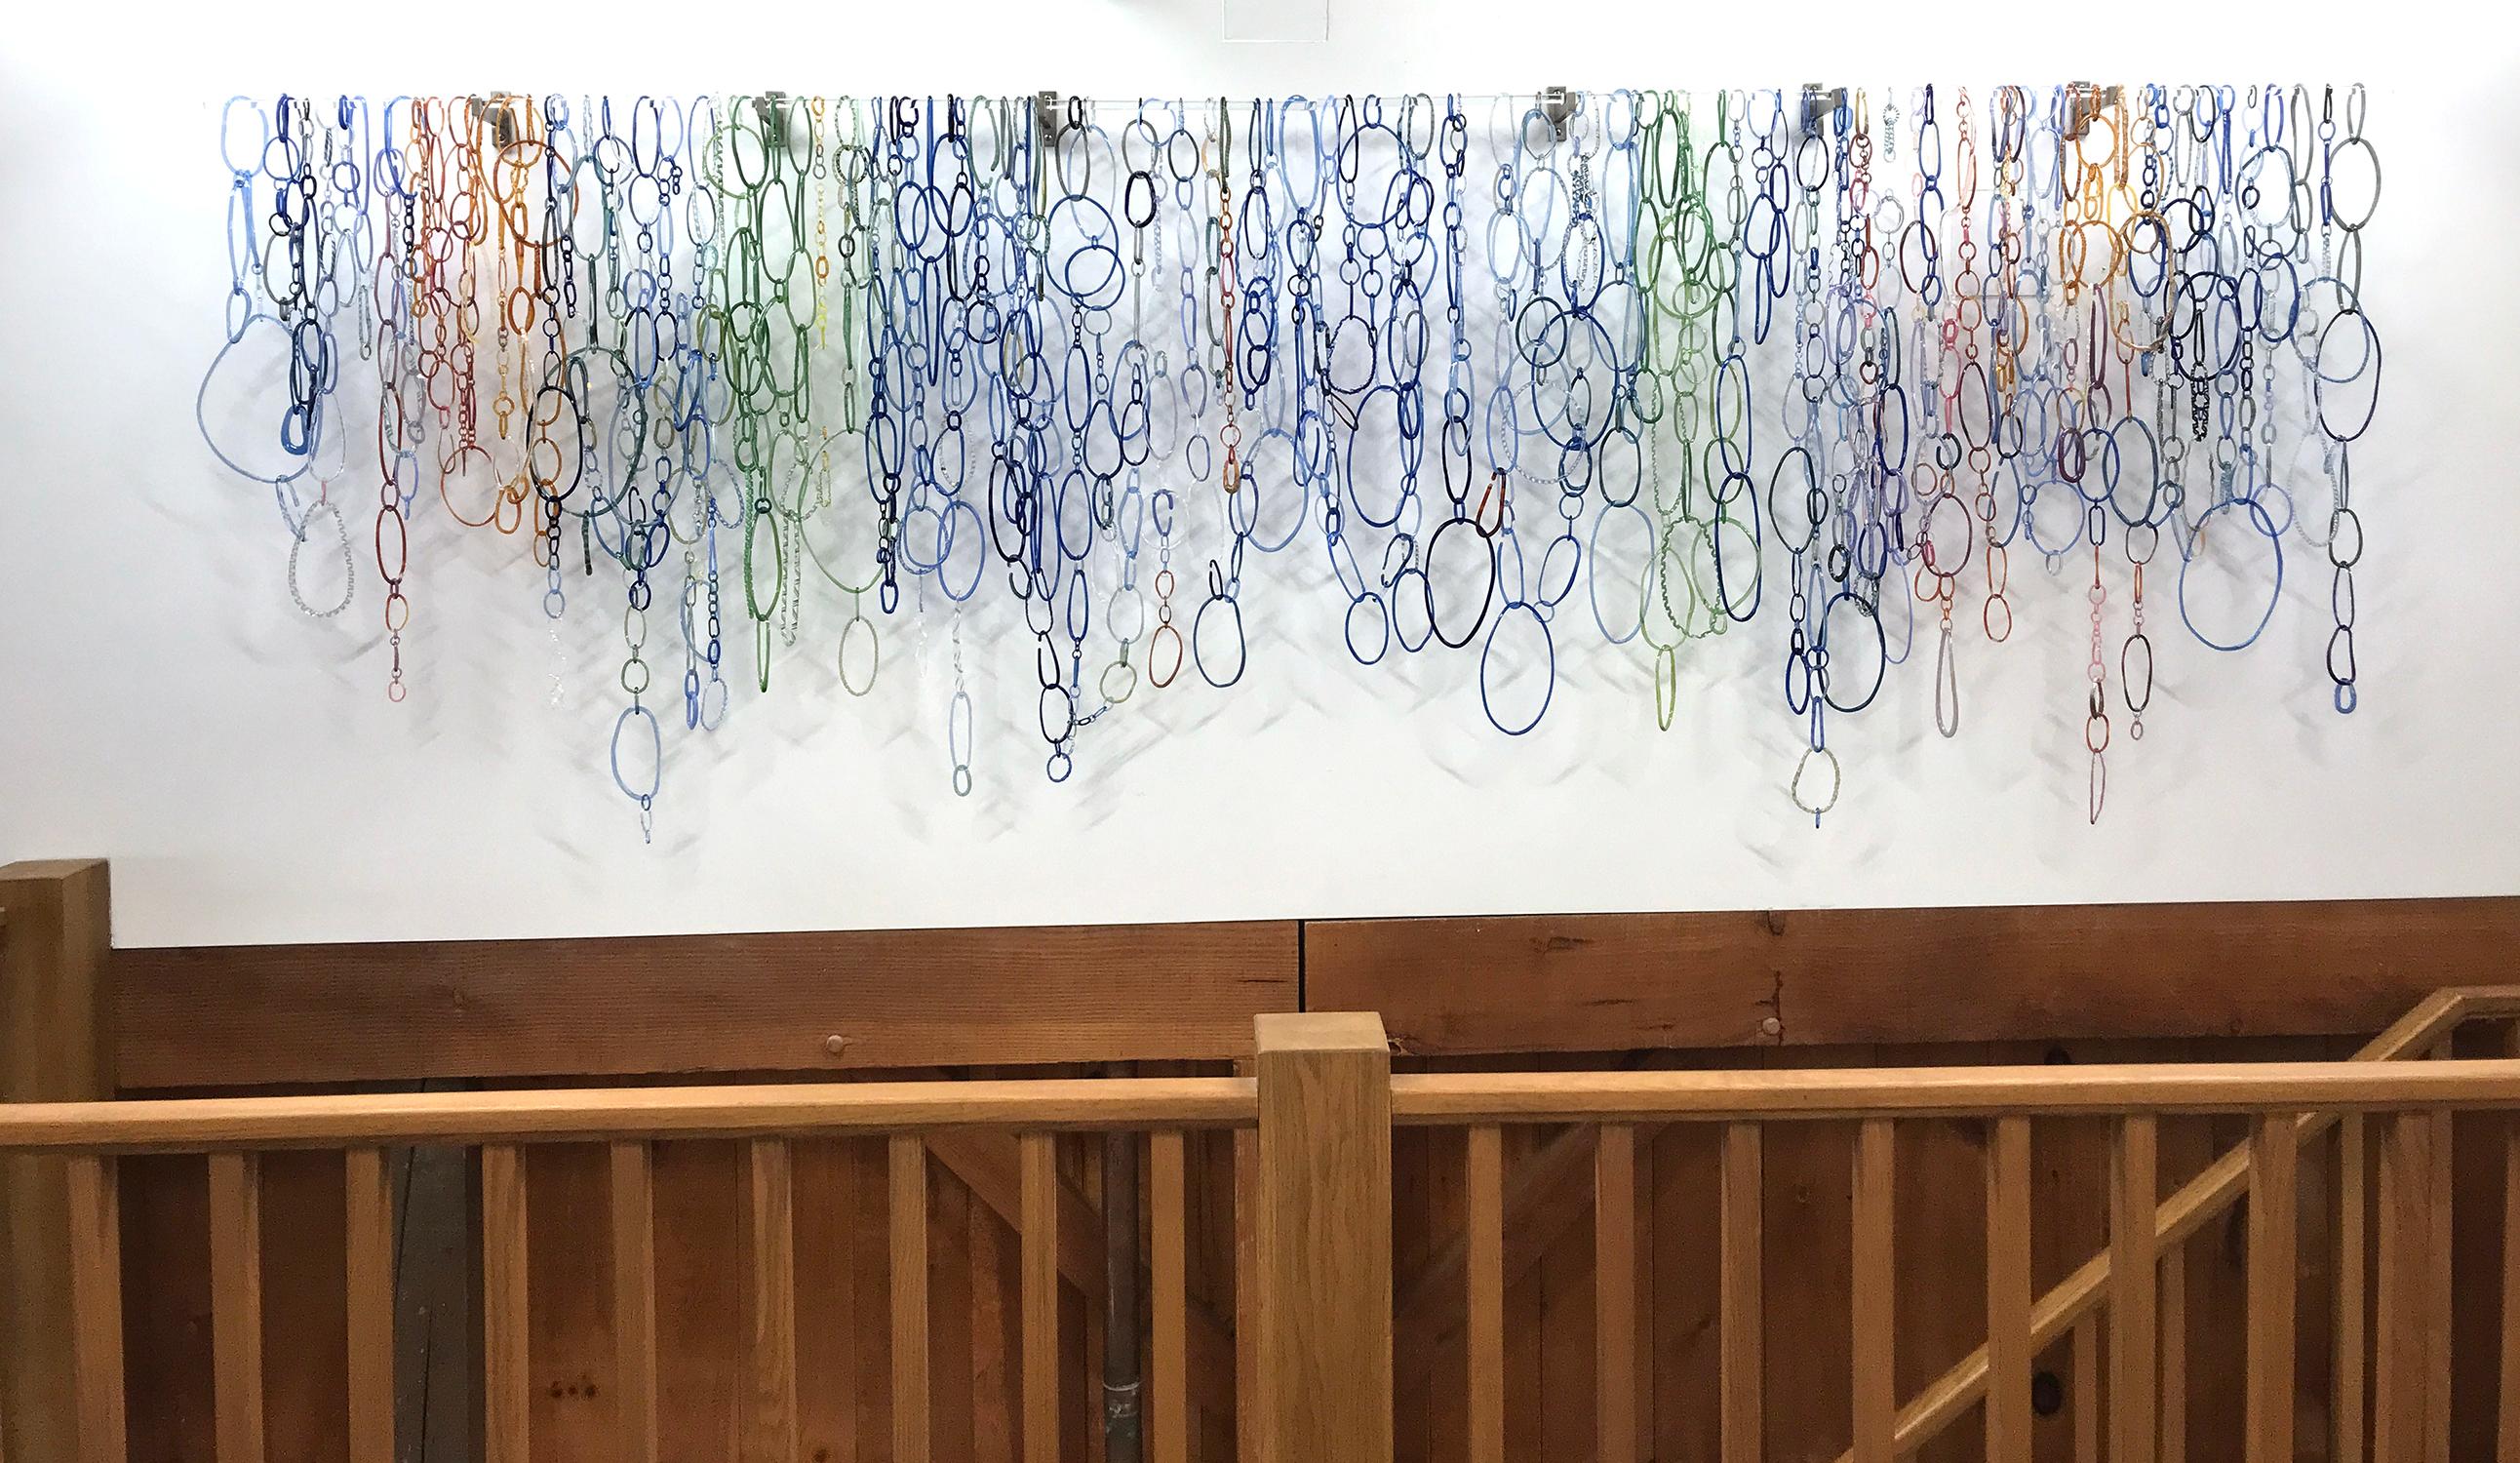 This wide horizontal hanging sculpture is composed of freeform circular loops in various shapes and textures of blue, teal, green, and golden orange with hints of coral pink torch worked borosilicate glass, linked together and hanging from a long